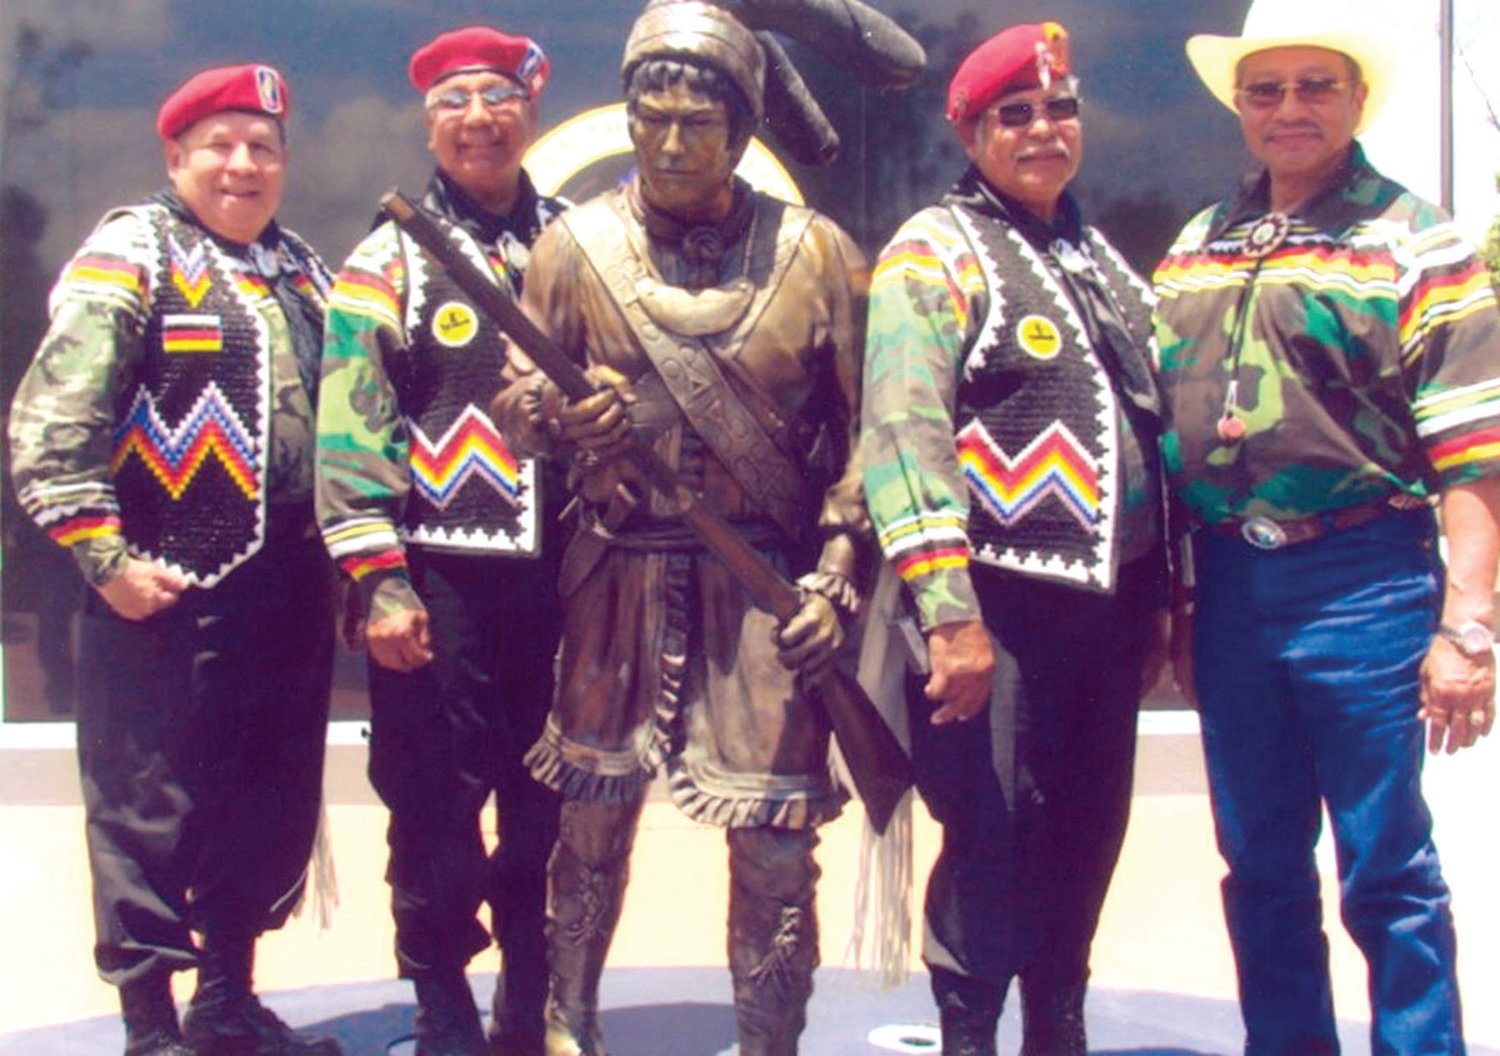 Stephen Bowers, far left, proudly served the Seminole Tribe Color Guard for decades.